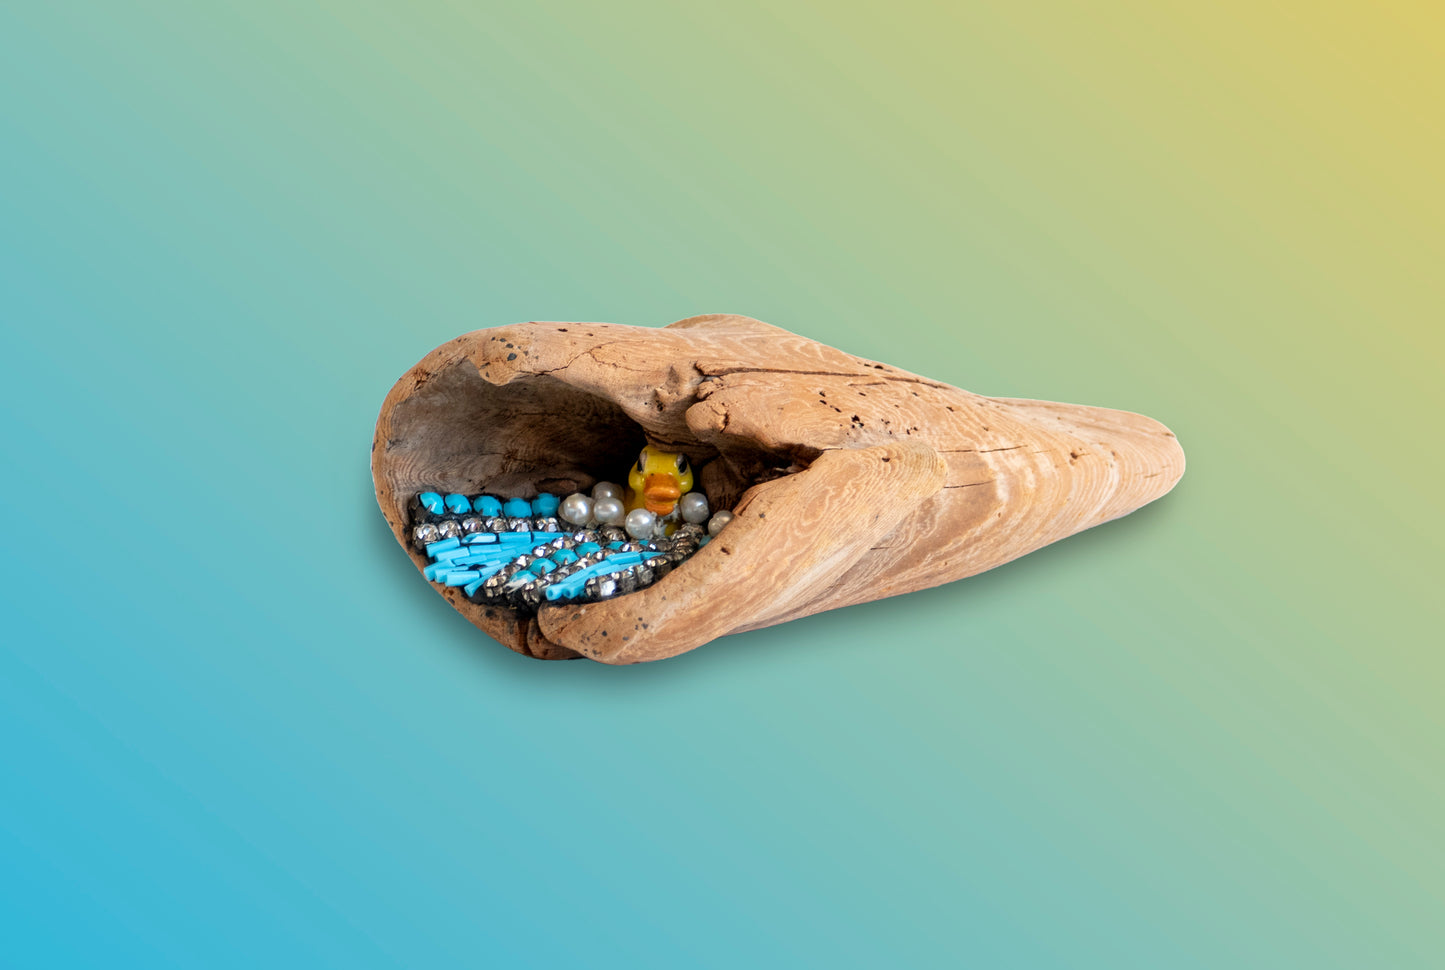 Natural driftwood sculpture decorated with beads, stones, and small toy duck by Denise Marshall title 'Duck at Sea''; 4"Wx2"H